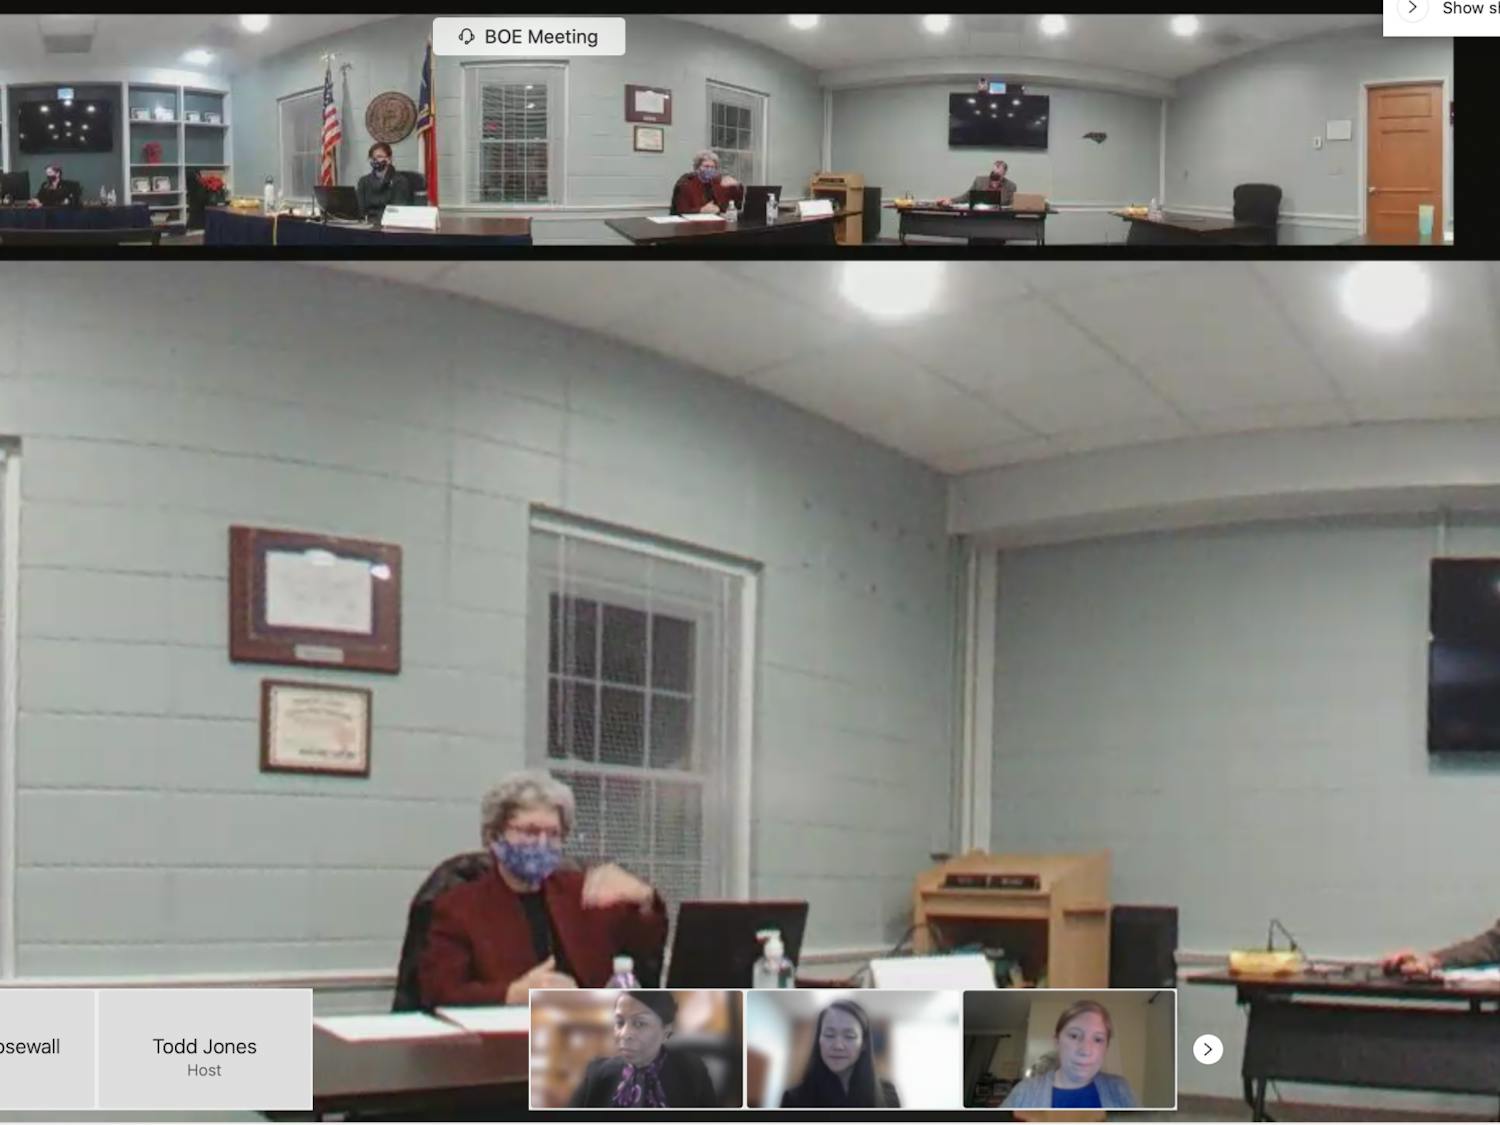 Members of the OC Board of Education met virtually on Monday, Dec. 14, 2020 to discuss COVID-19 updates and transitions to hybrid learning.